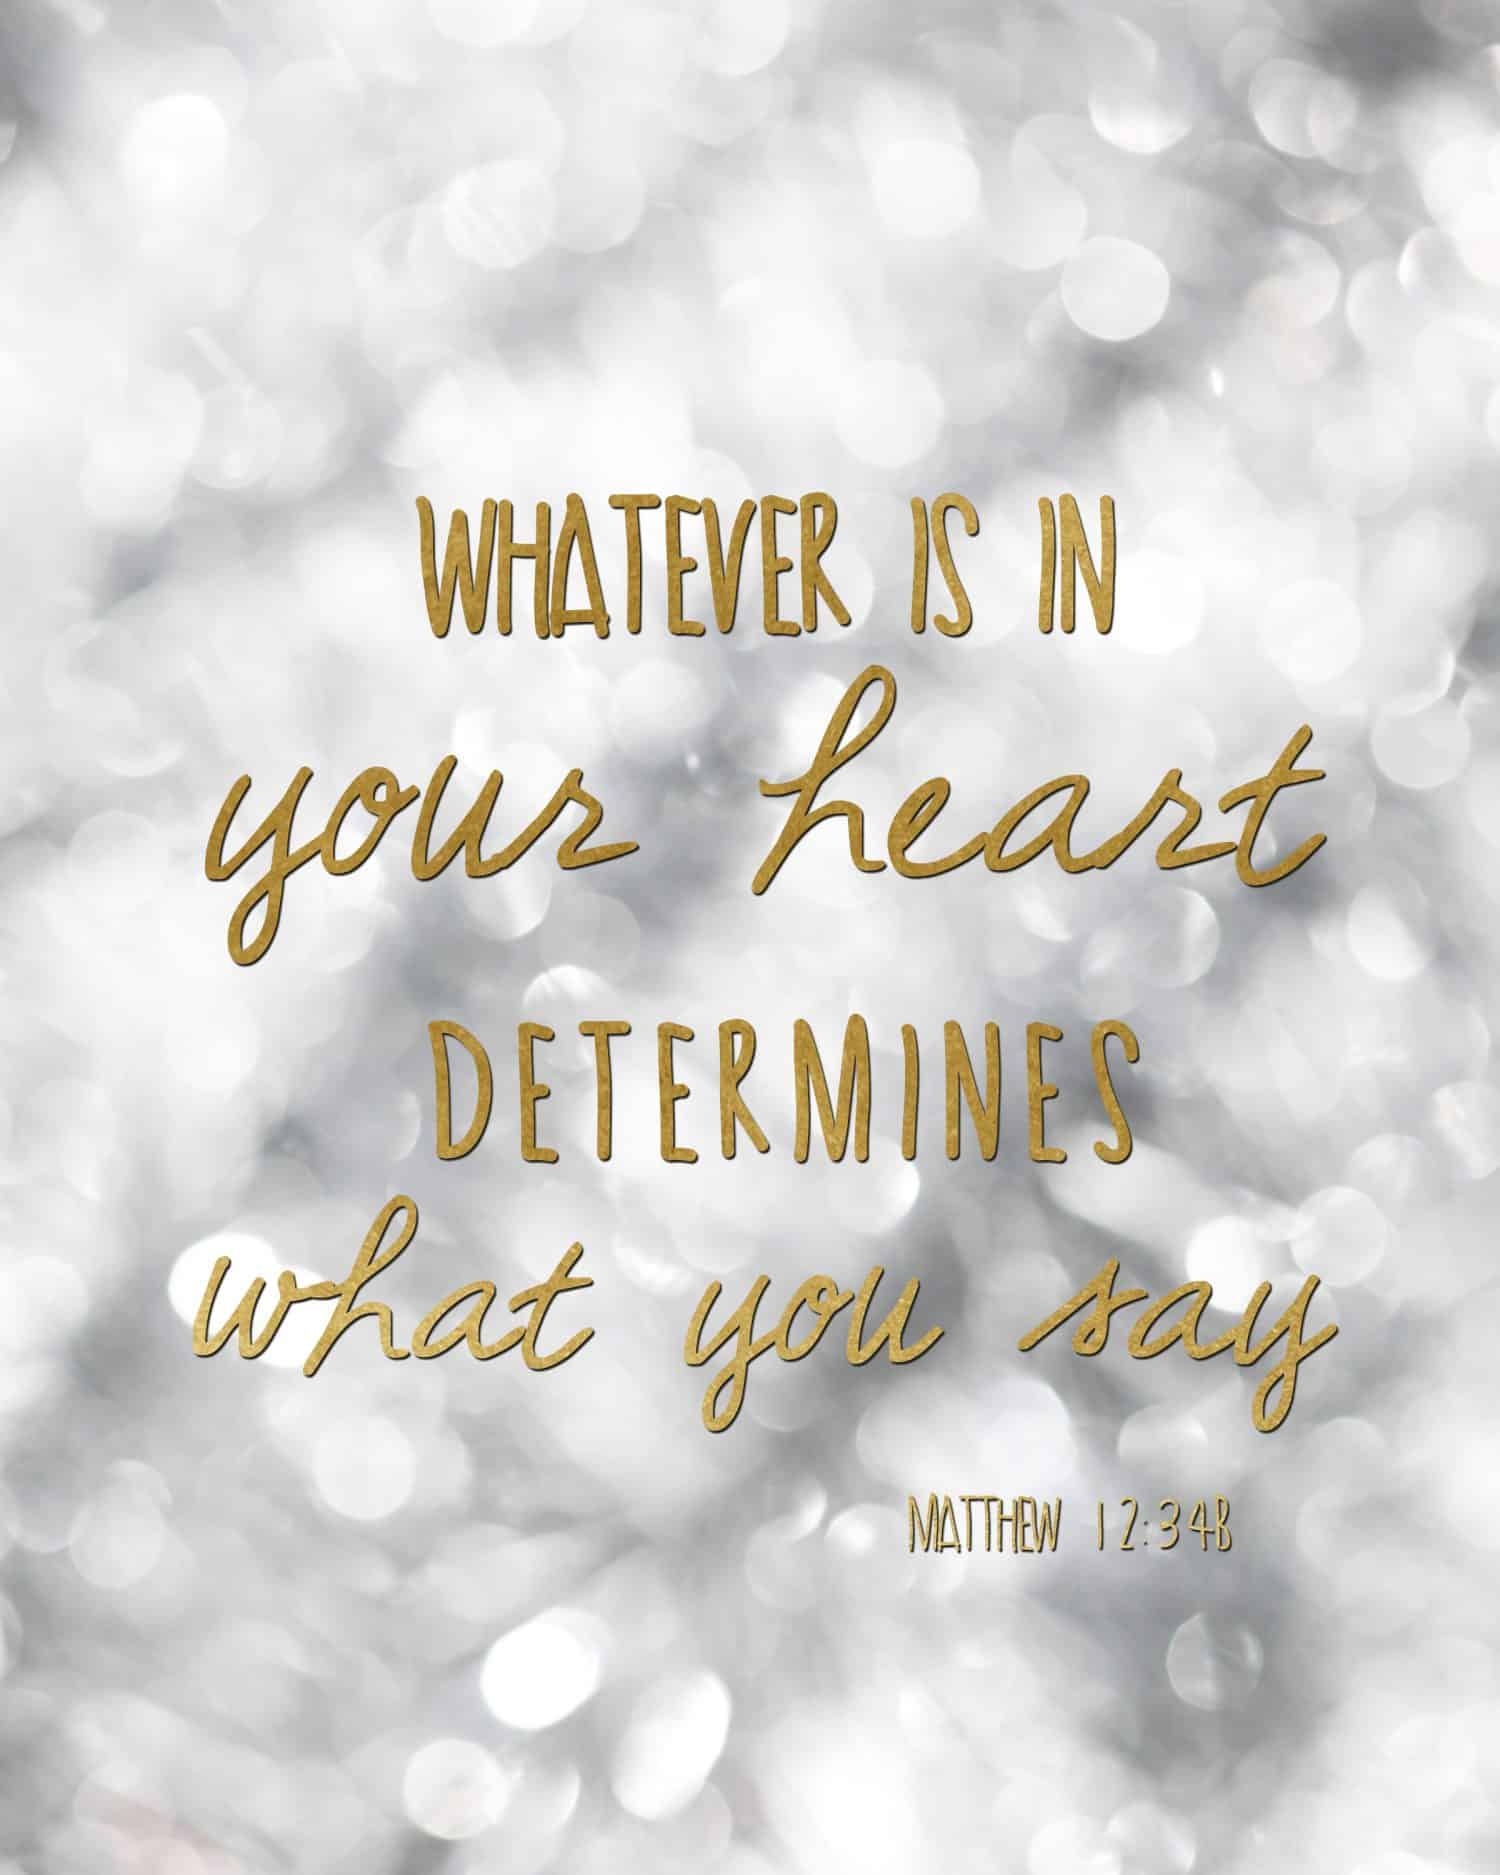 Words to Live by | Matthew 12:34